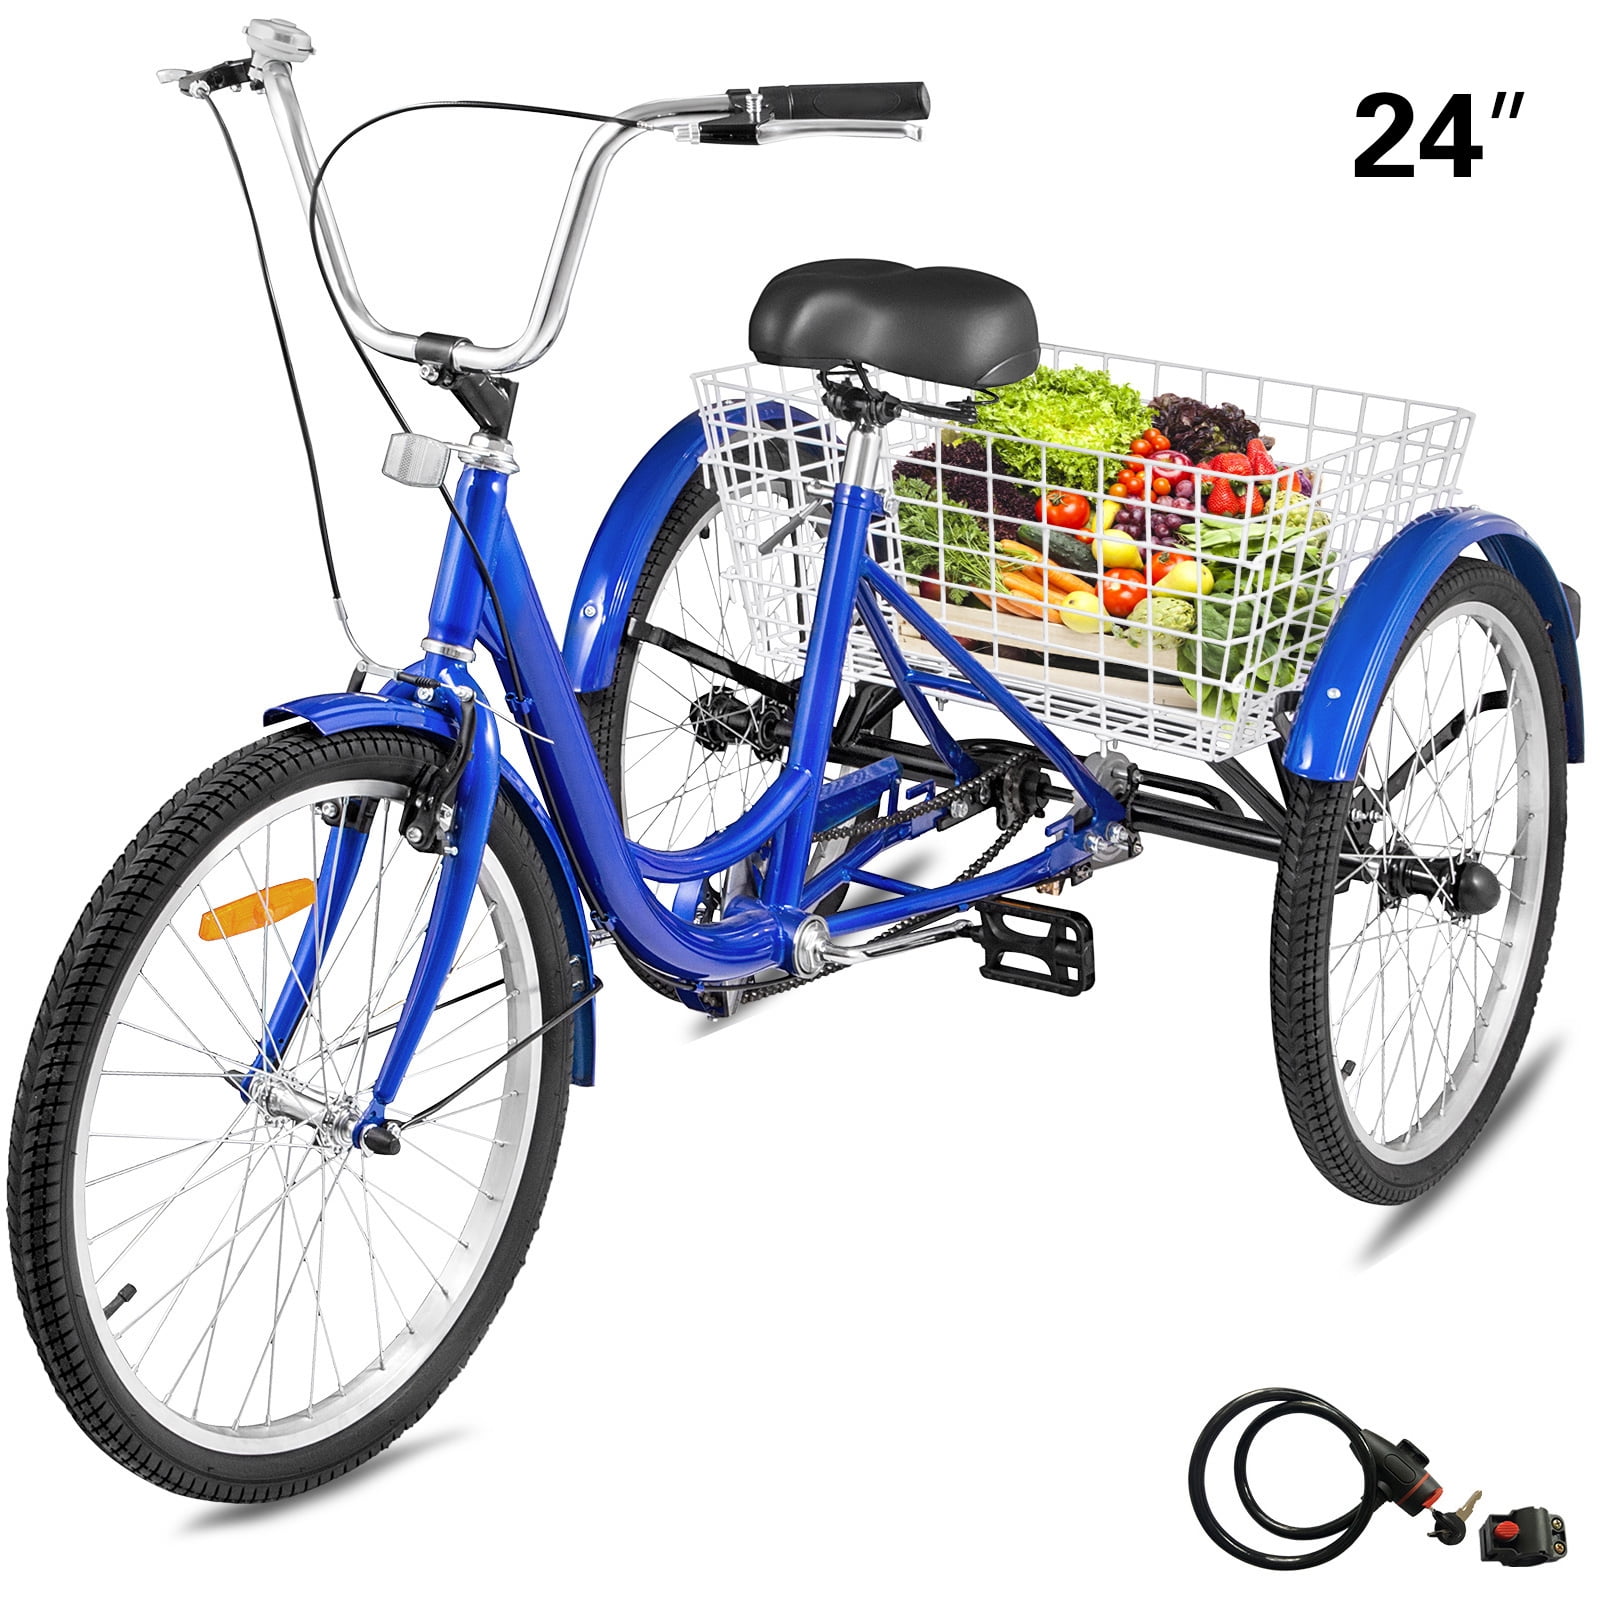 24" Adult Tricycle 3-Wheel Trike Cruiser Bicycle w/Basket for Shopping 